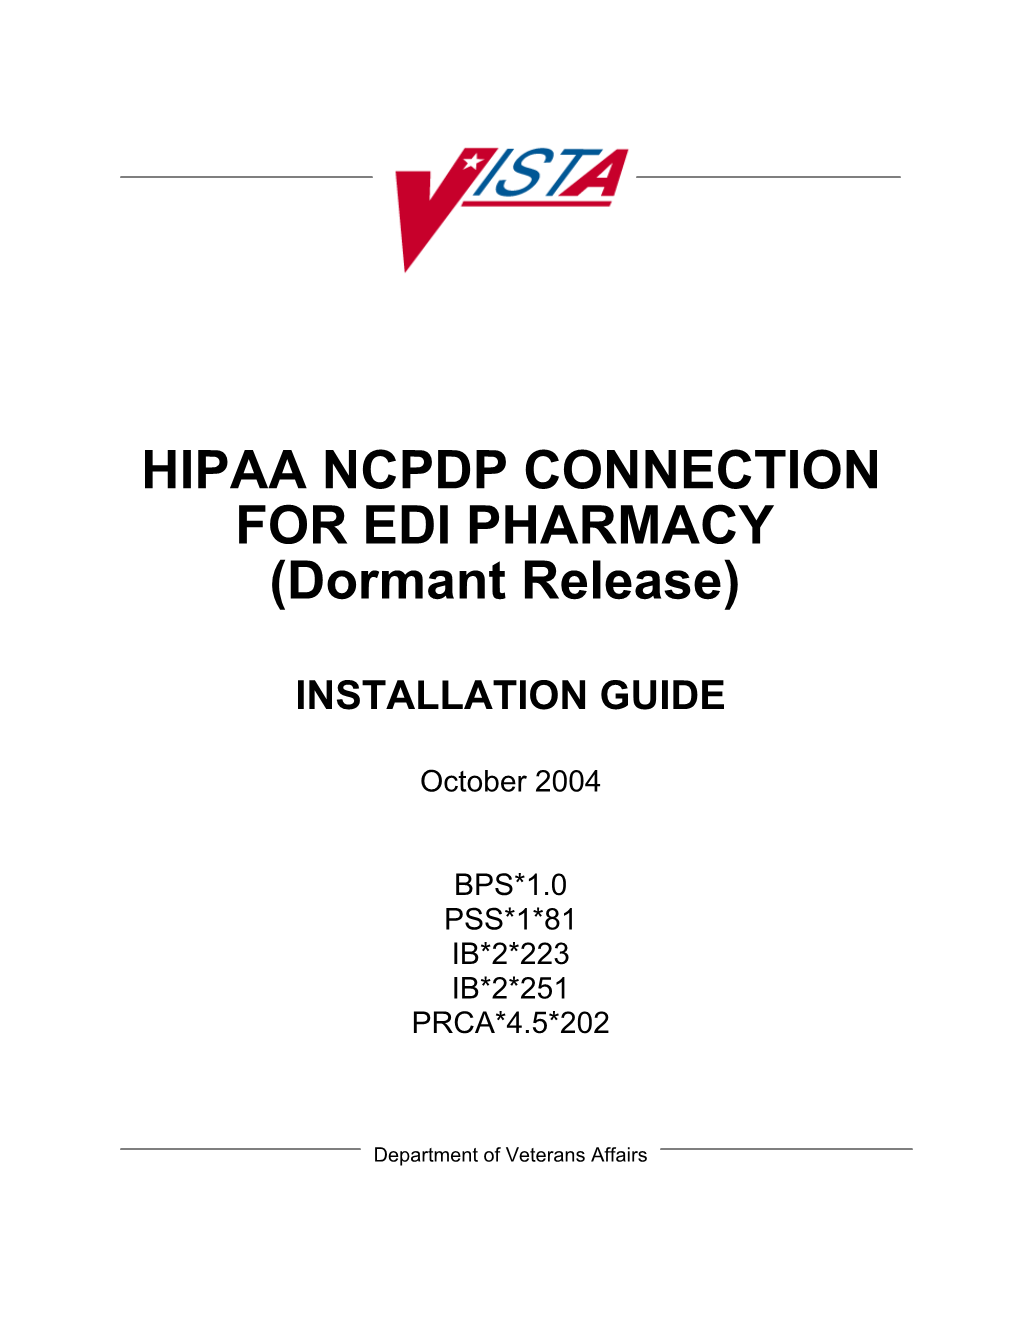 Hipaa Ncpdp Connection for EDI Pharmacy (Dormant Release)